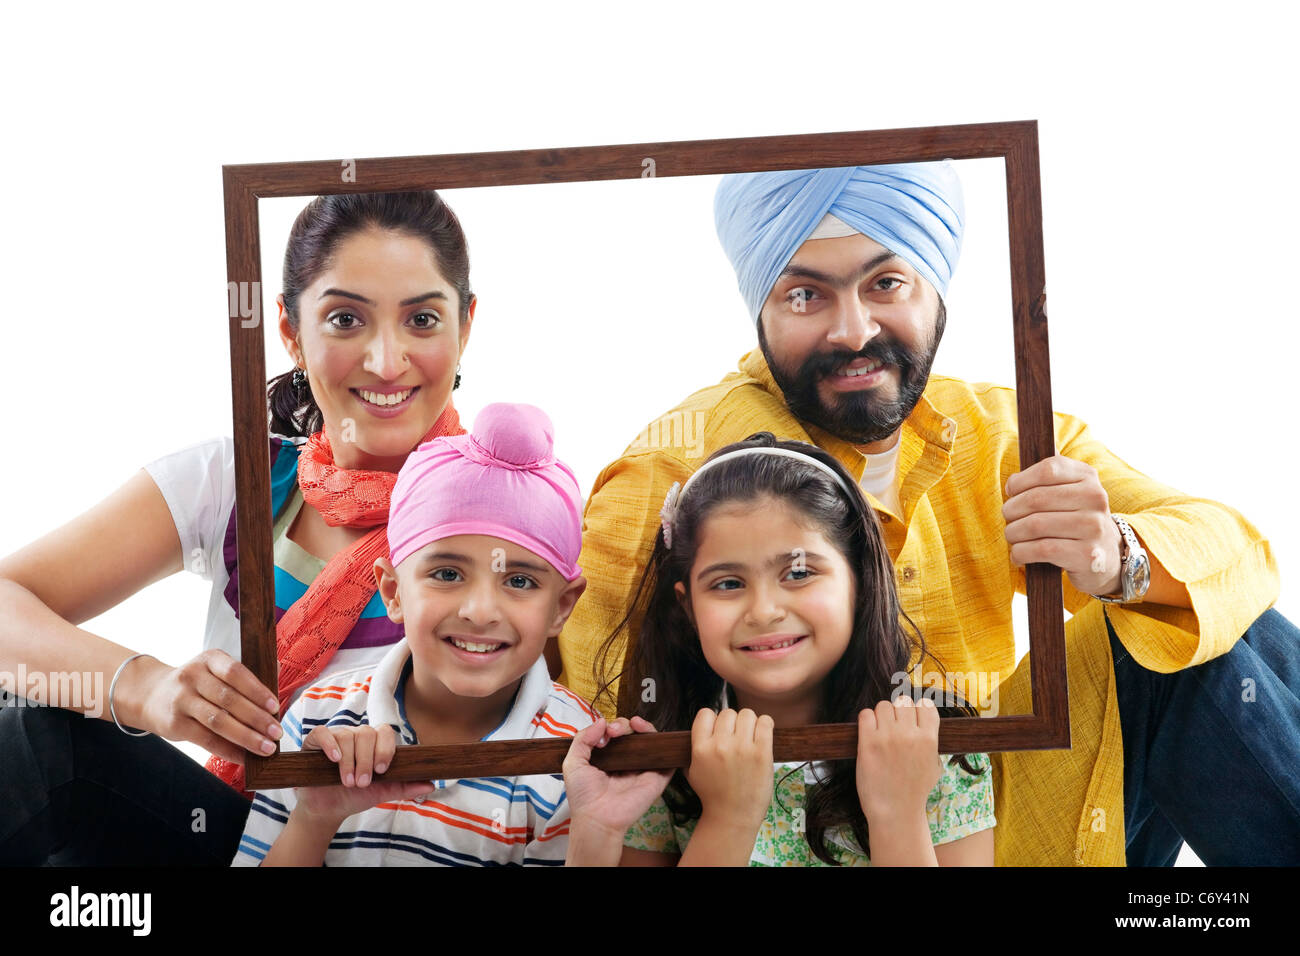 Portrait of a Sikh family through a wooden frame Stock Photo